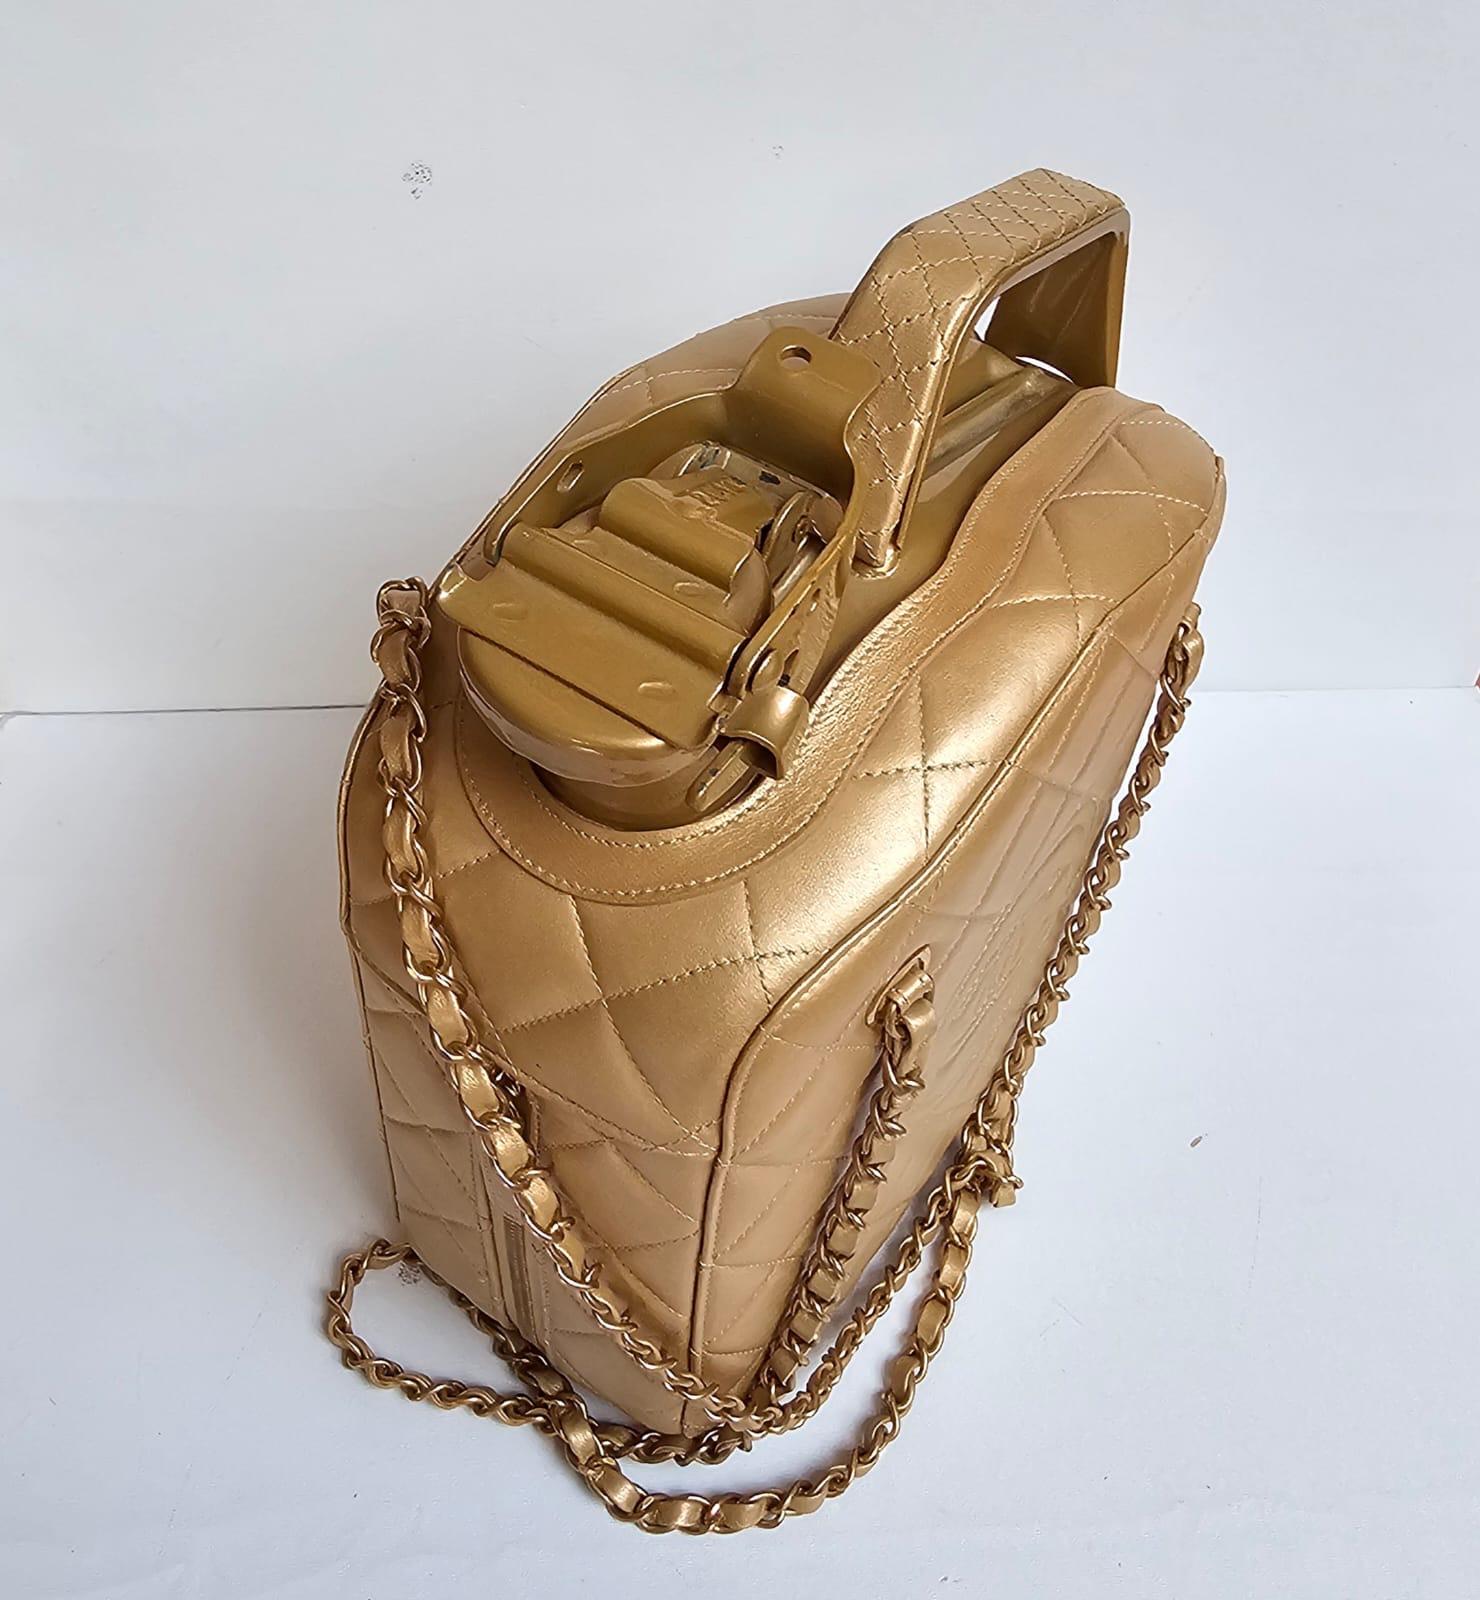 Rare Chanel runway piece from Dubai Cruise 2015 in Gold leather. Overall still in well kept condition. Very minor ripping on the bottom exterior leather but not too visible. Slight chipping on the opening hardware. Comes as is with replacement dust